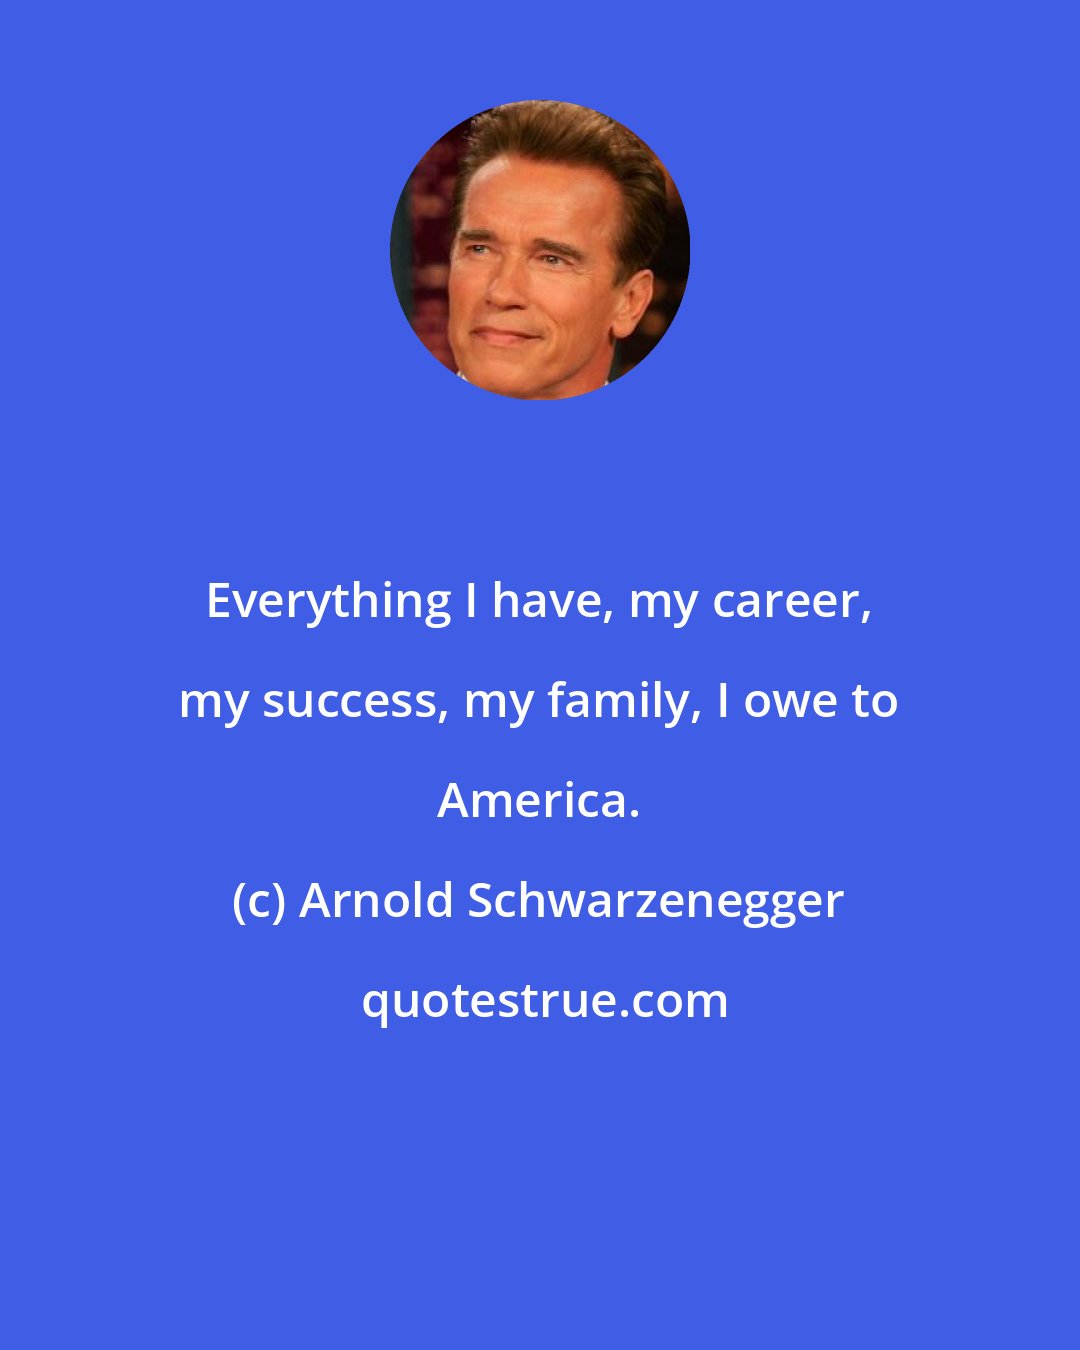 Arnold Schwarzenegger: Everything I have, my career, my success, my family, I owe to America.